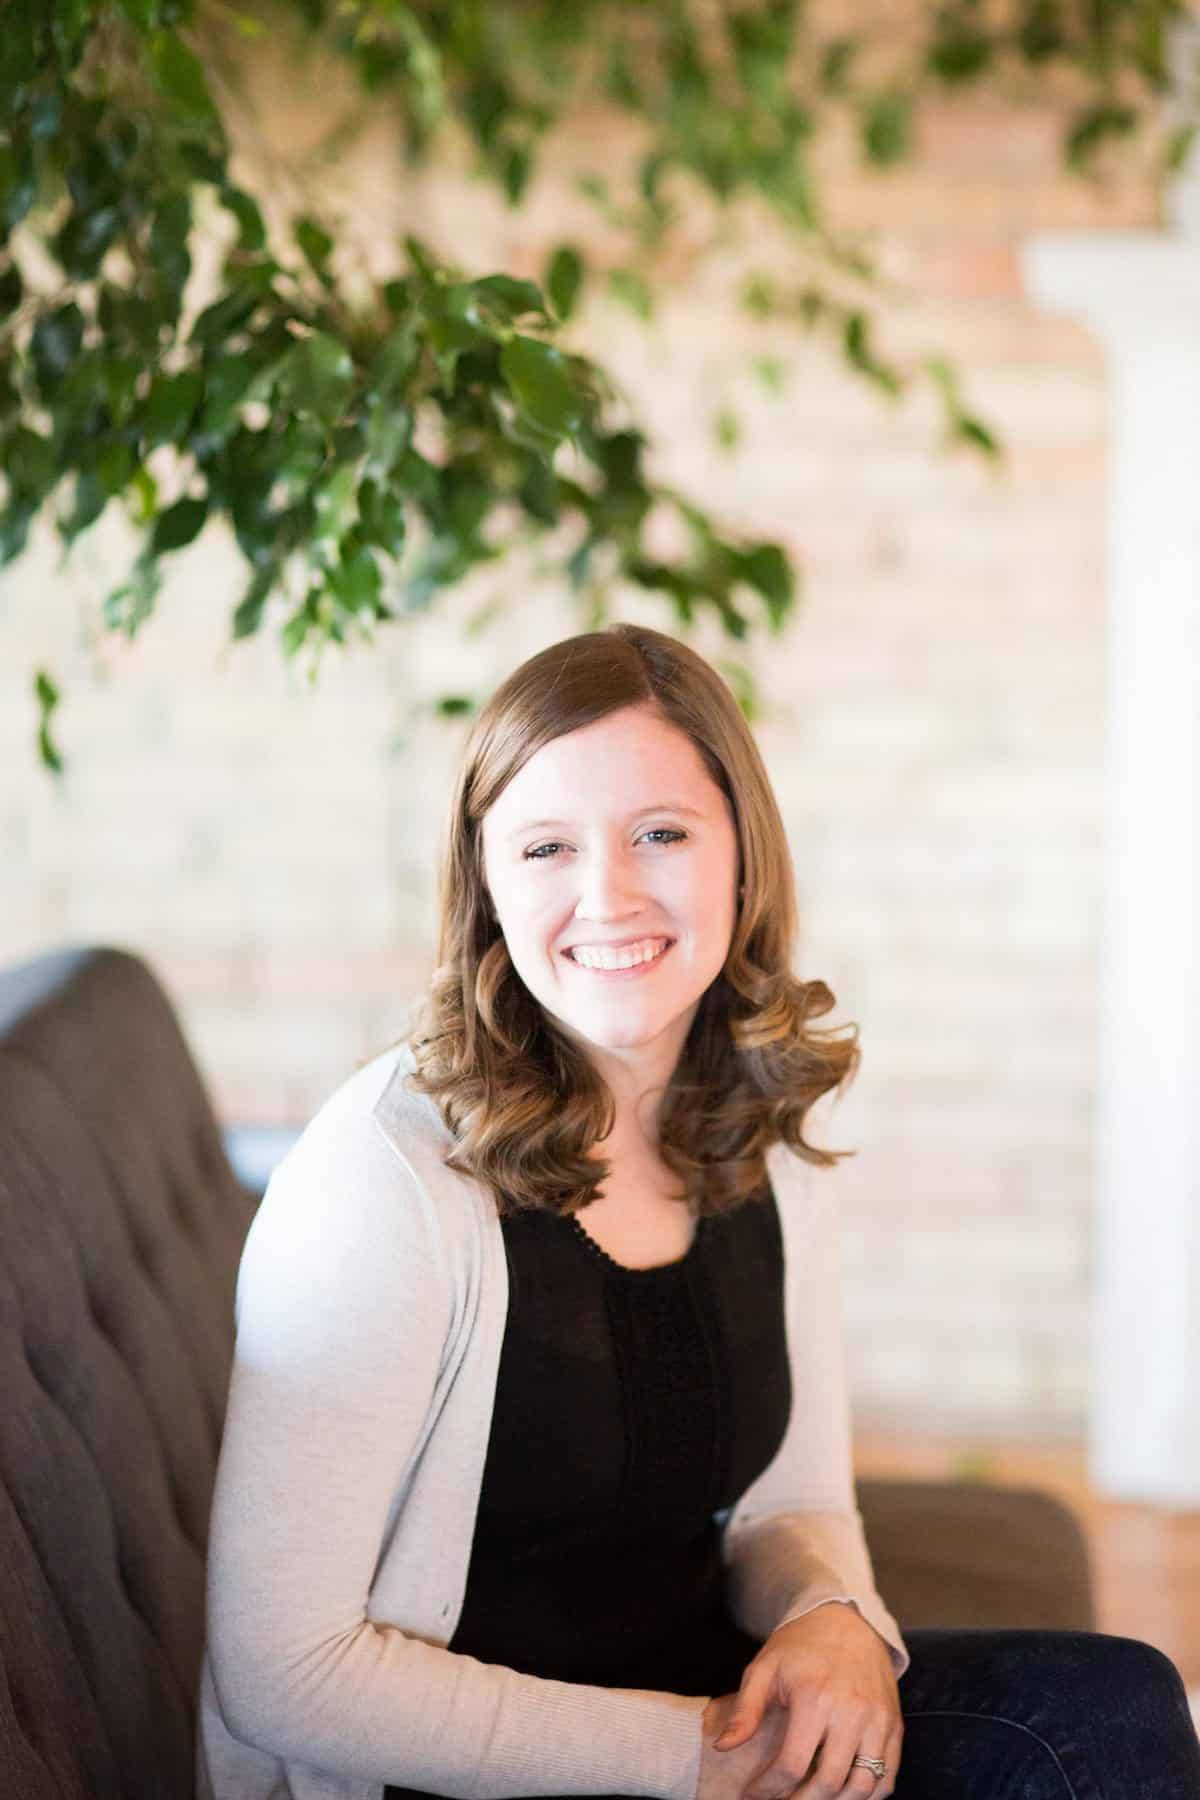 Meet Jenna: Pinch of Yum’s New Office Manager!